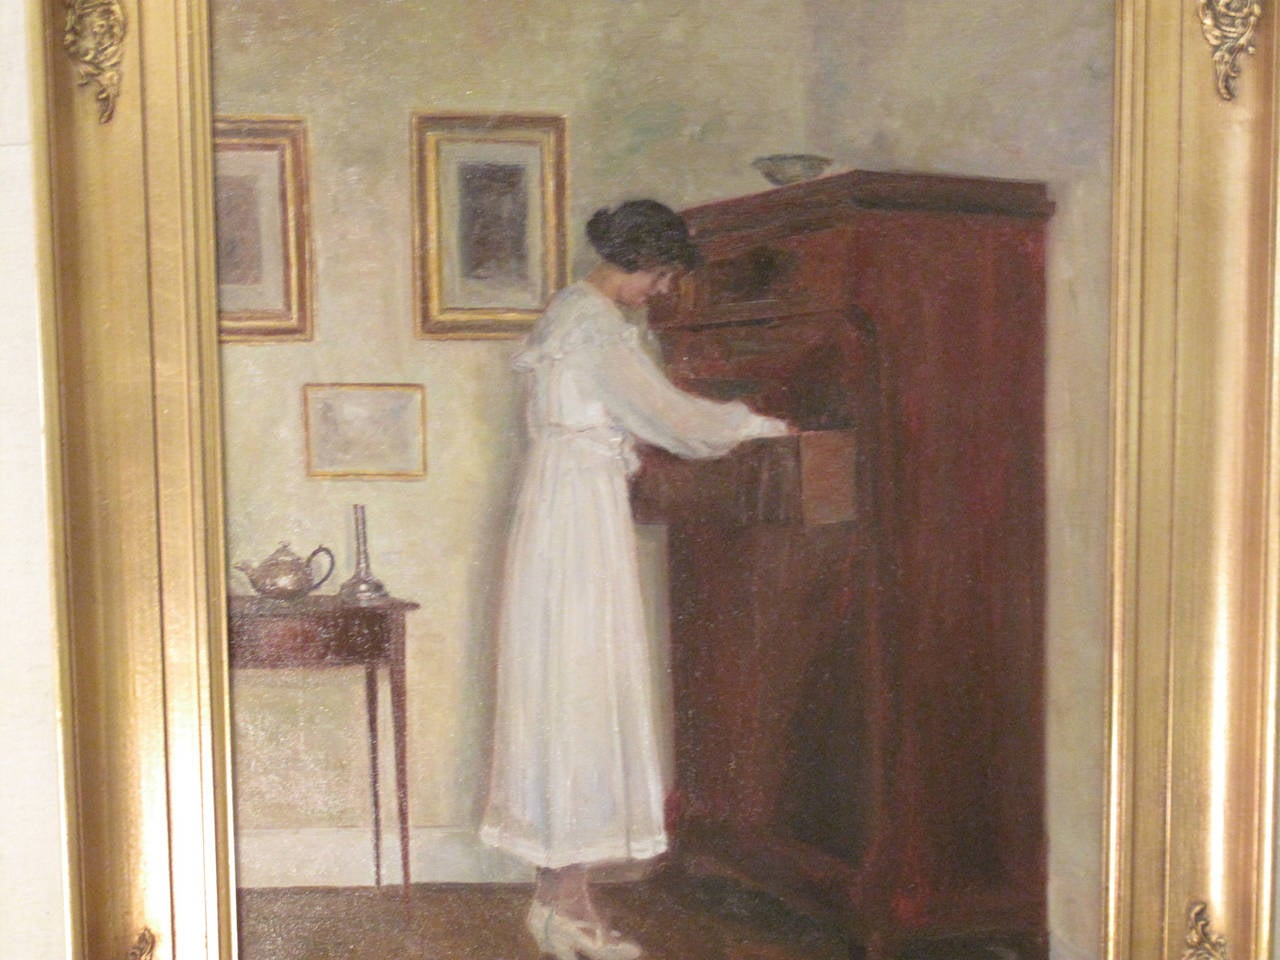 Interior scene of a woman in a white dress with an antique bureau.  Painting by Poul Friis Nybo 1869-1929.  Pupil of Zahrtman's school, studied in Paris.  Exhibited at Charlottenborg 1892-1930.  Exhibited in Chicago 1893.  Painted interiors in the